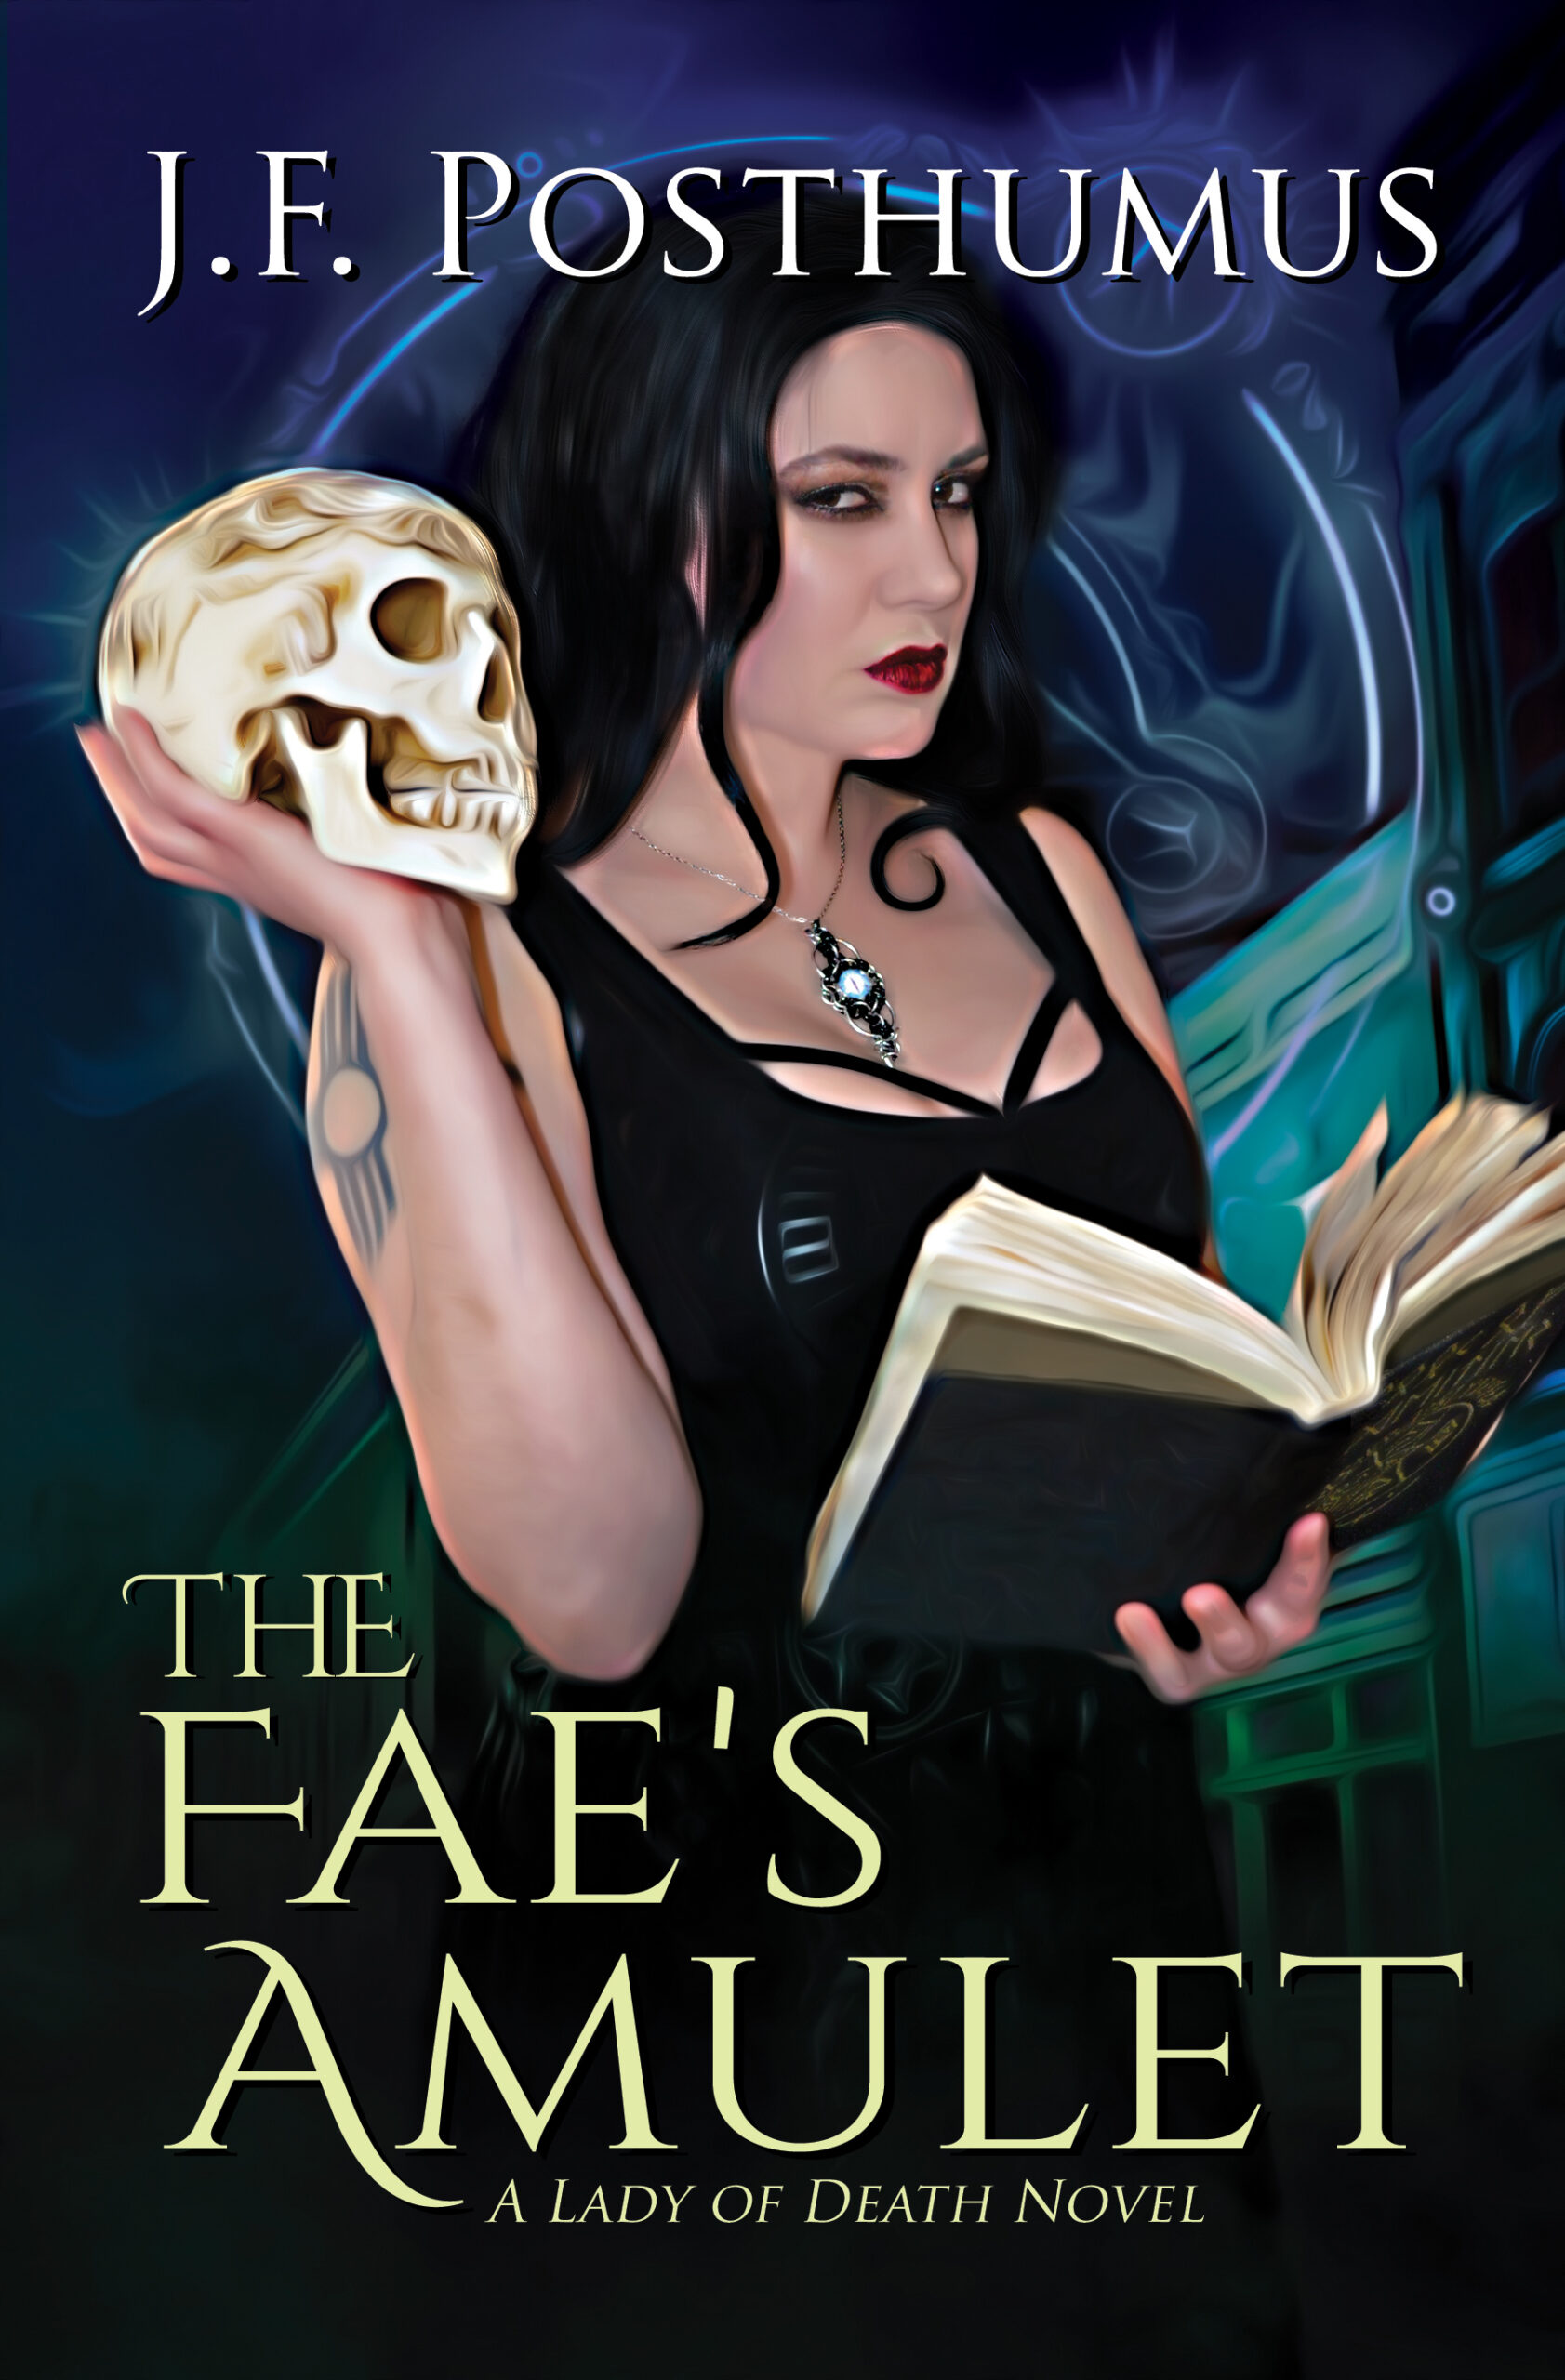 Ready for your next free read from Three Ravens? How about a little urban Fantasy for your weekend binge-reading? Pick up your free ebook copy of Fae’s Amulet by J.F. Posthumus.